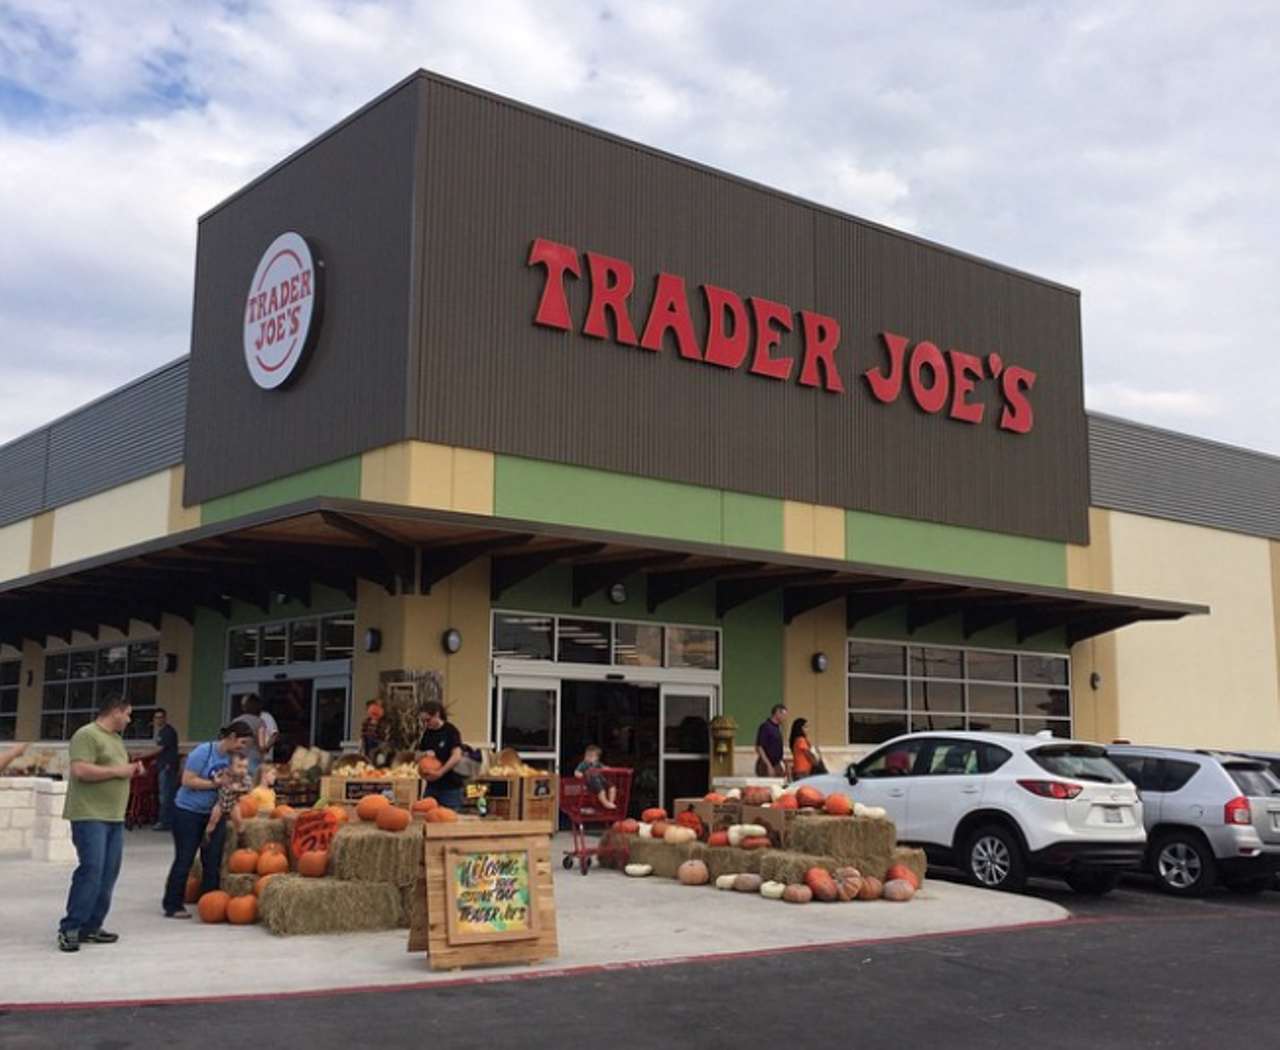 Trader Joe’s
Multiple locations, traderjoes.com
While Trader Joe’s may have a lot of pumpkin-inspired treats for sale, the OG pumpkin staple is on its way. Beginning October 28, San Antonians can indulge in the store’s offering of pumpkin pie.
Photo via Instagram / crossfitfamily